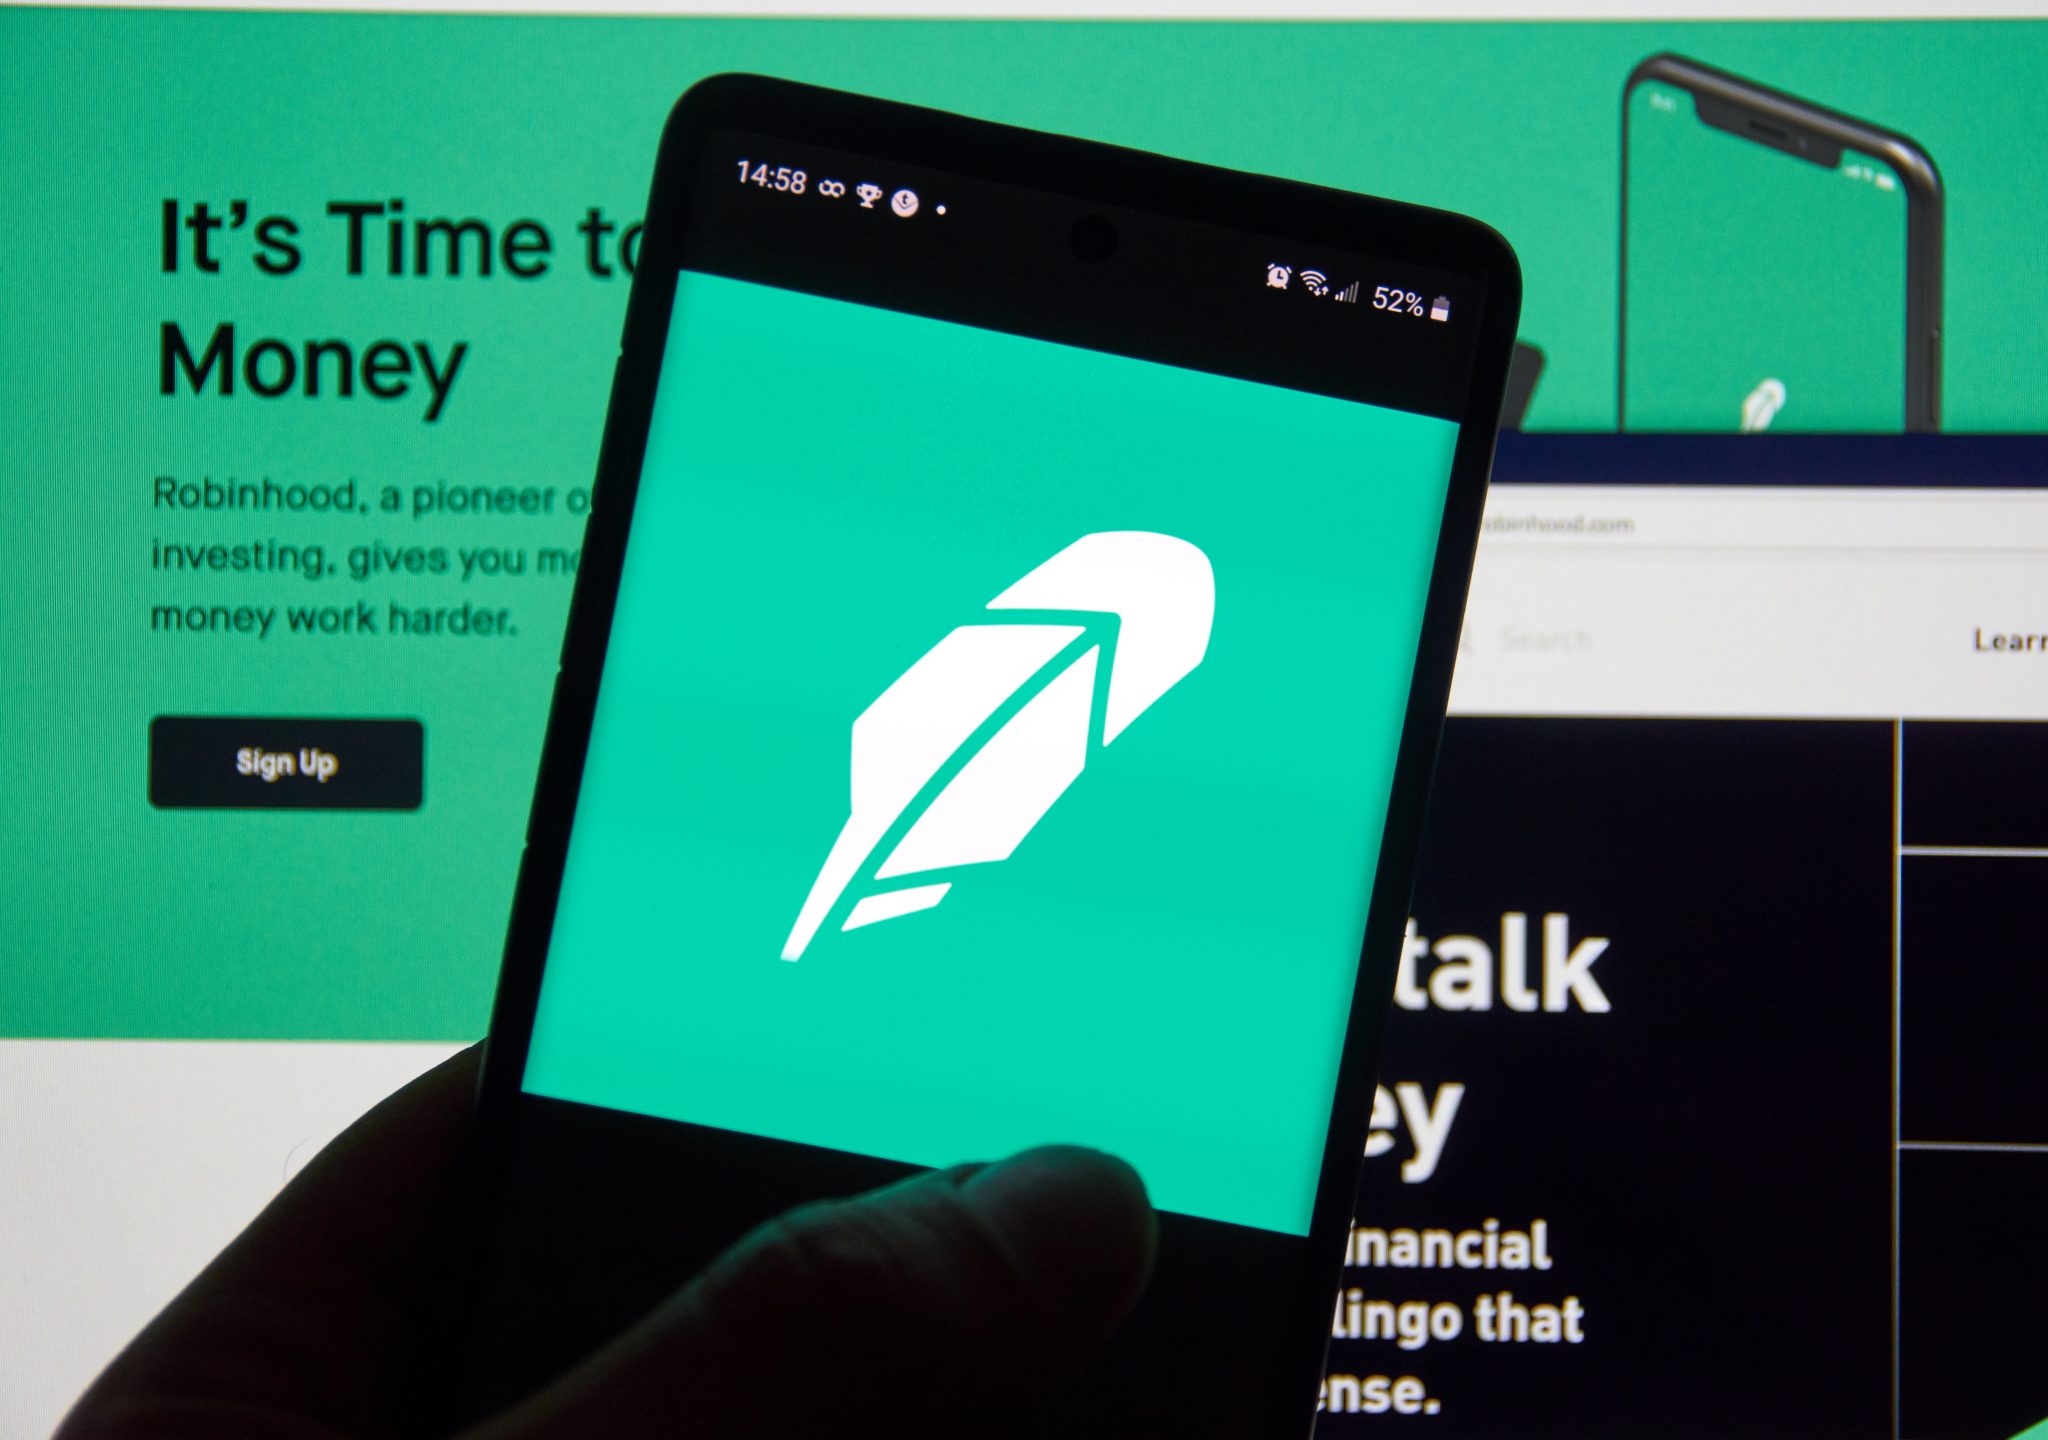 Montreal, Canada - March 08, 2020: Robinhood app and logo on screen. Robinhood financial services company. The company offers mobile app and website that offers people the ability to invest in stocks